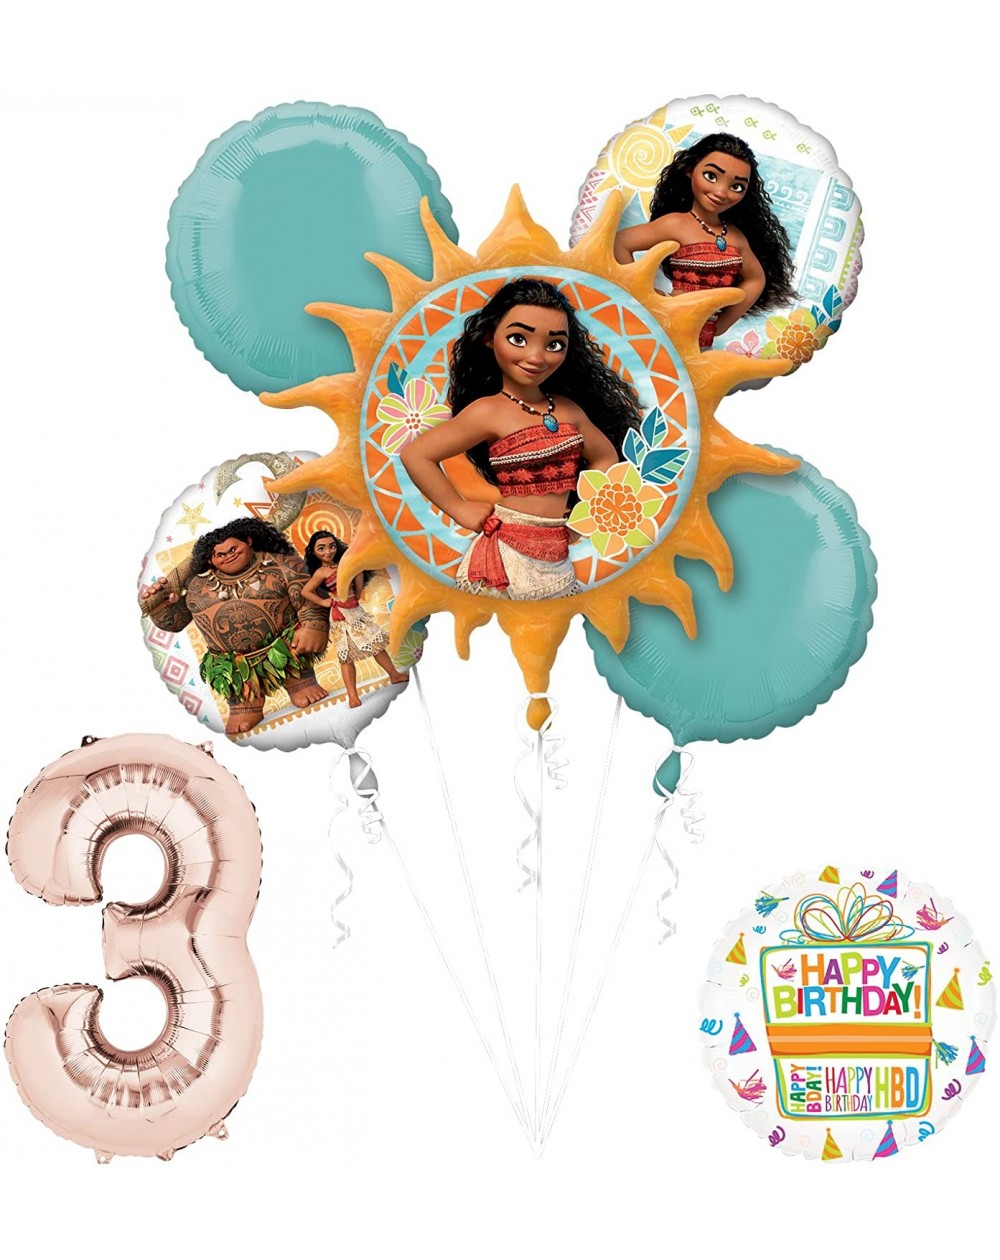 Balloons Moana 3rd Birthday Party Supplies and Princess Balloon Bouquet Decorations - C11897YQ47T $22.39